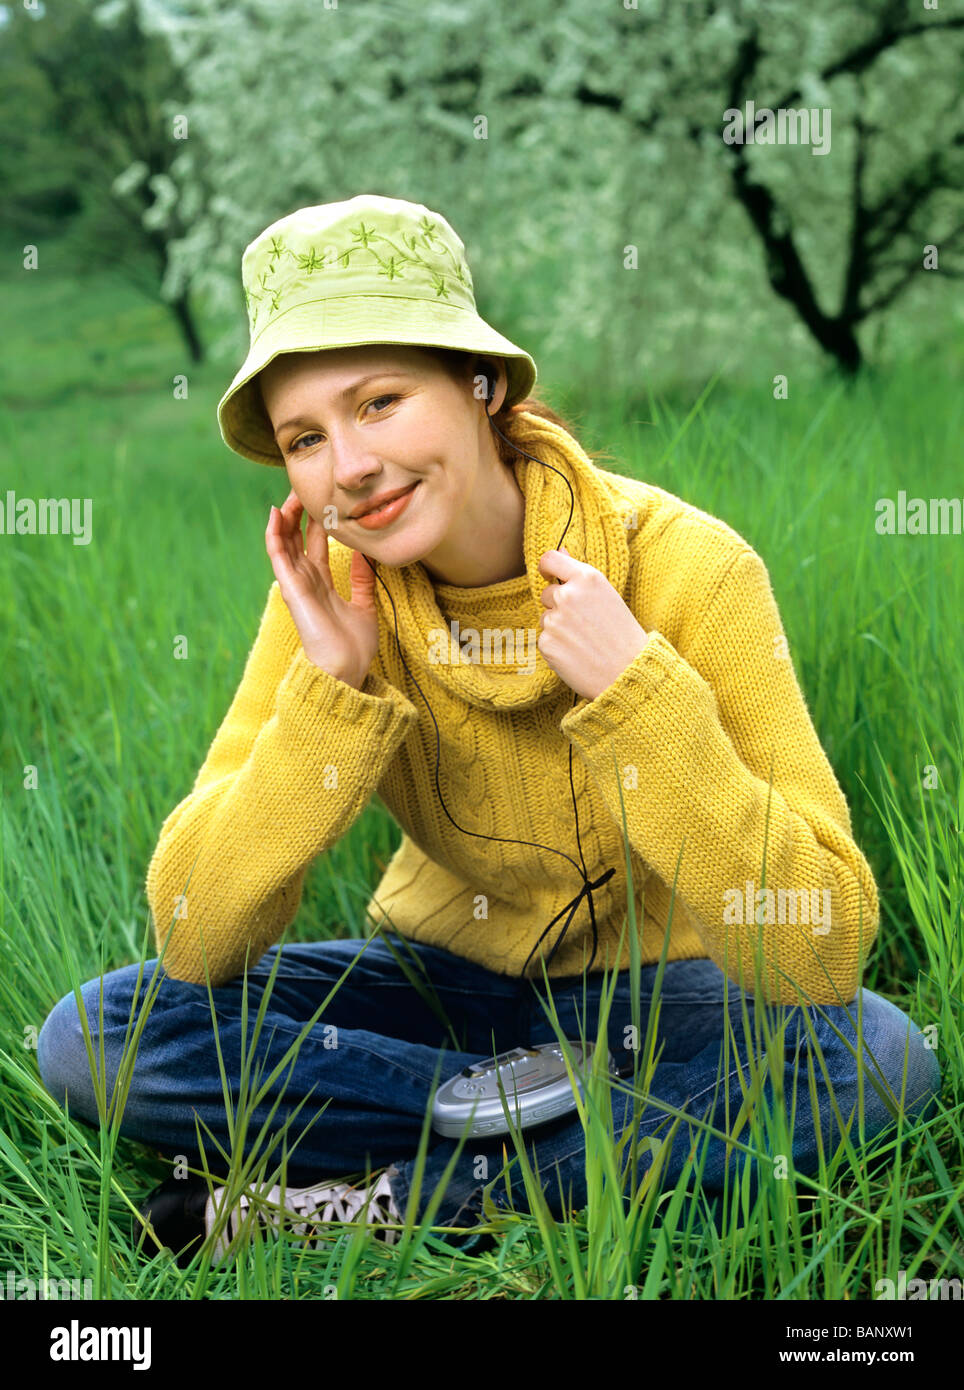 people, woman, 25-30, 30-35, red-haired, hat, listen, music, discman, headphones, smile, smiling, orchard, outdoor, summer, ver Stock Photo